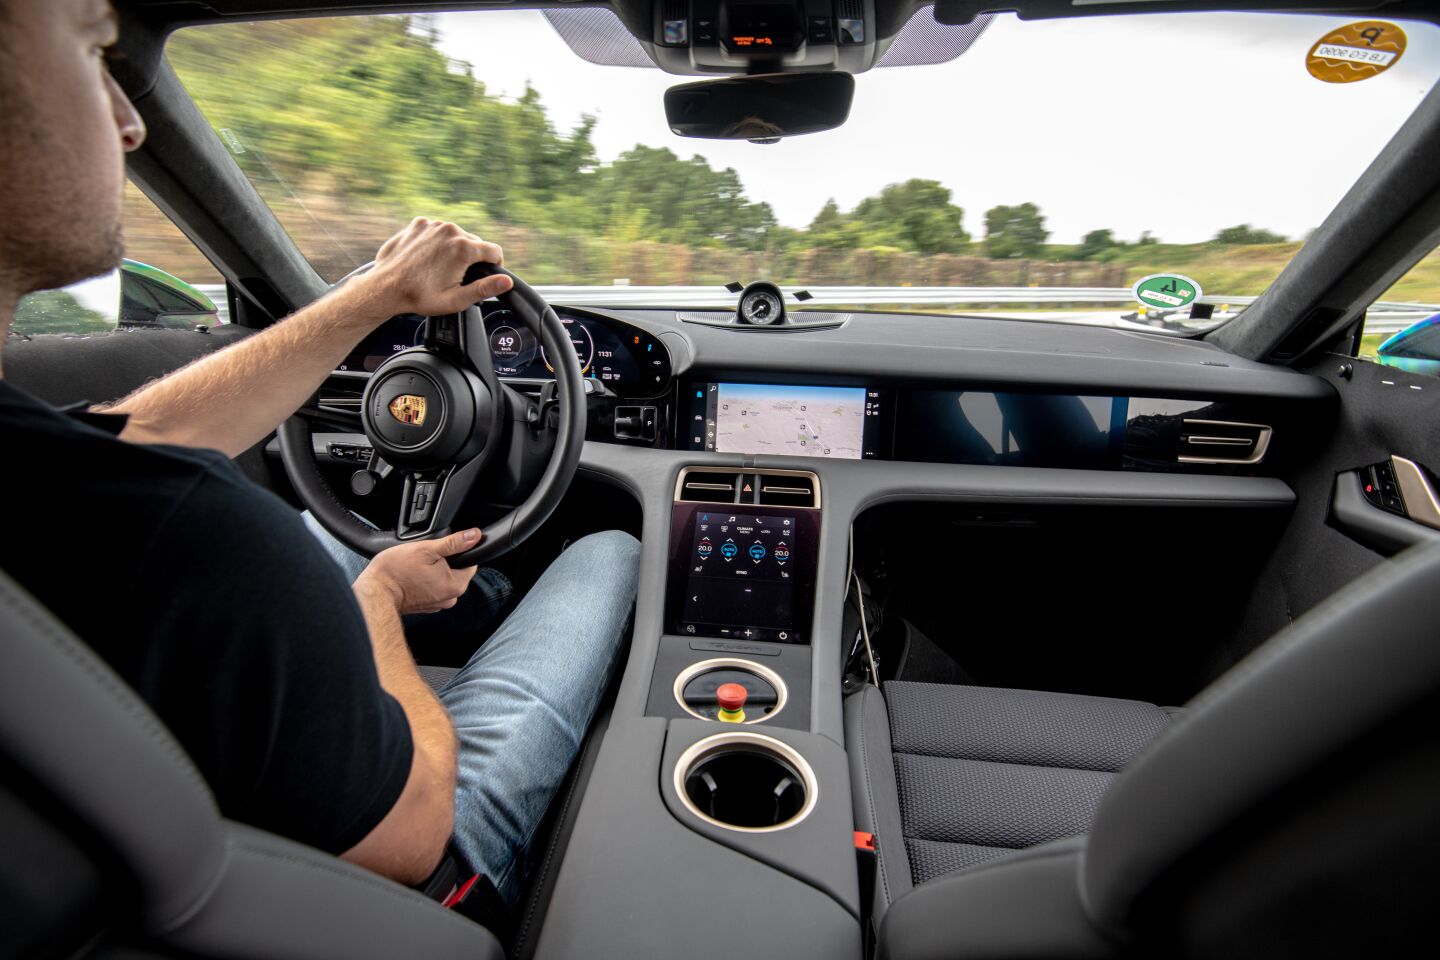 The Taycan's interior is filled with digital technology. That challenged designers to maintain Porsche's classically clean look while modernizing the cockpit.